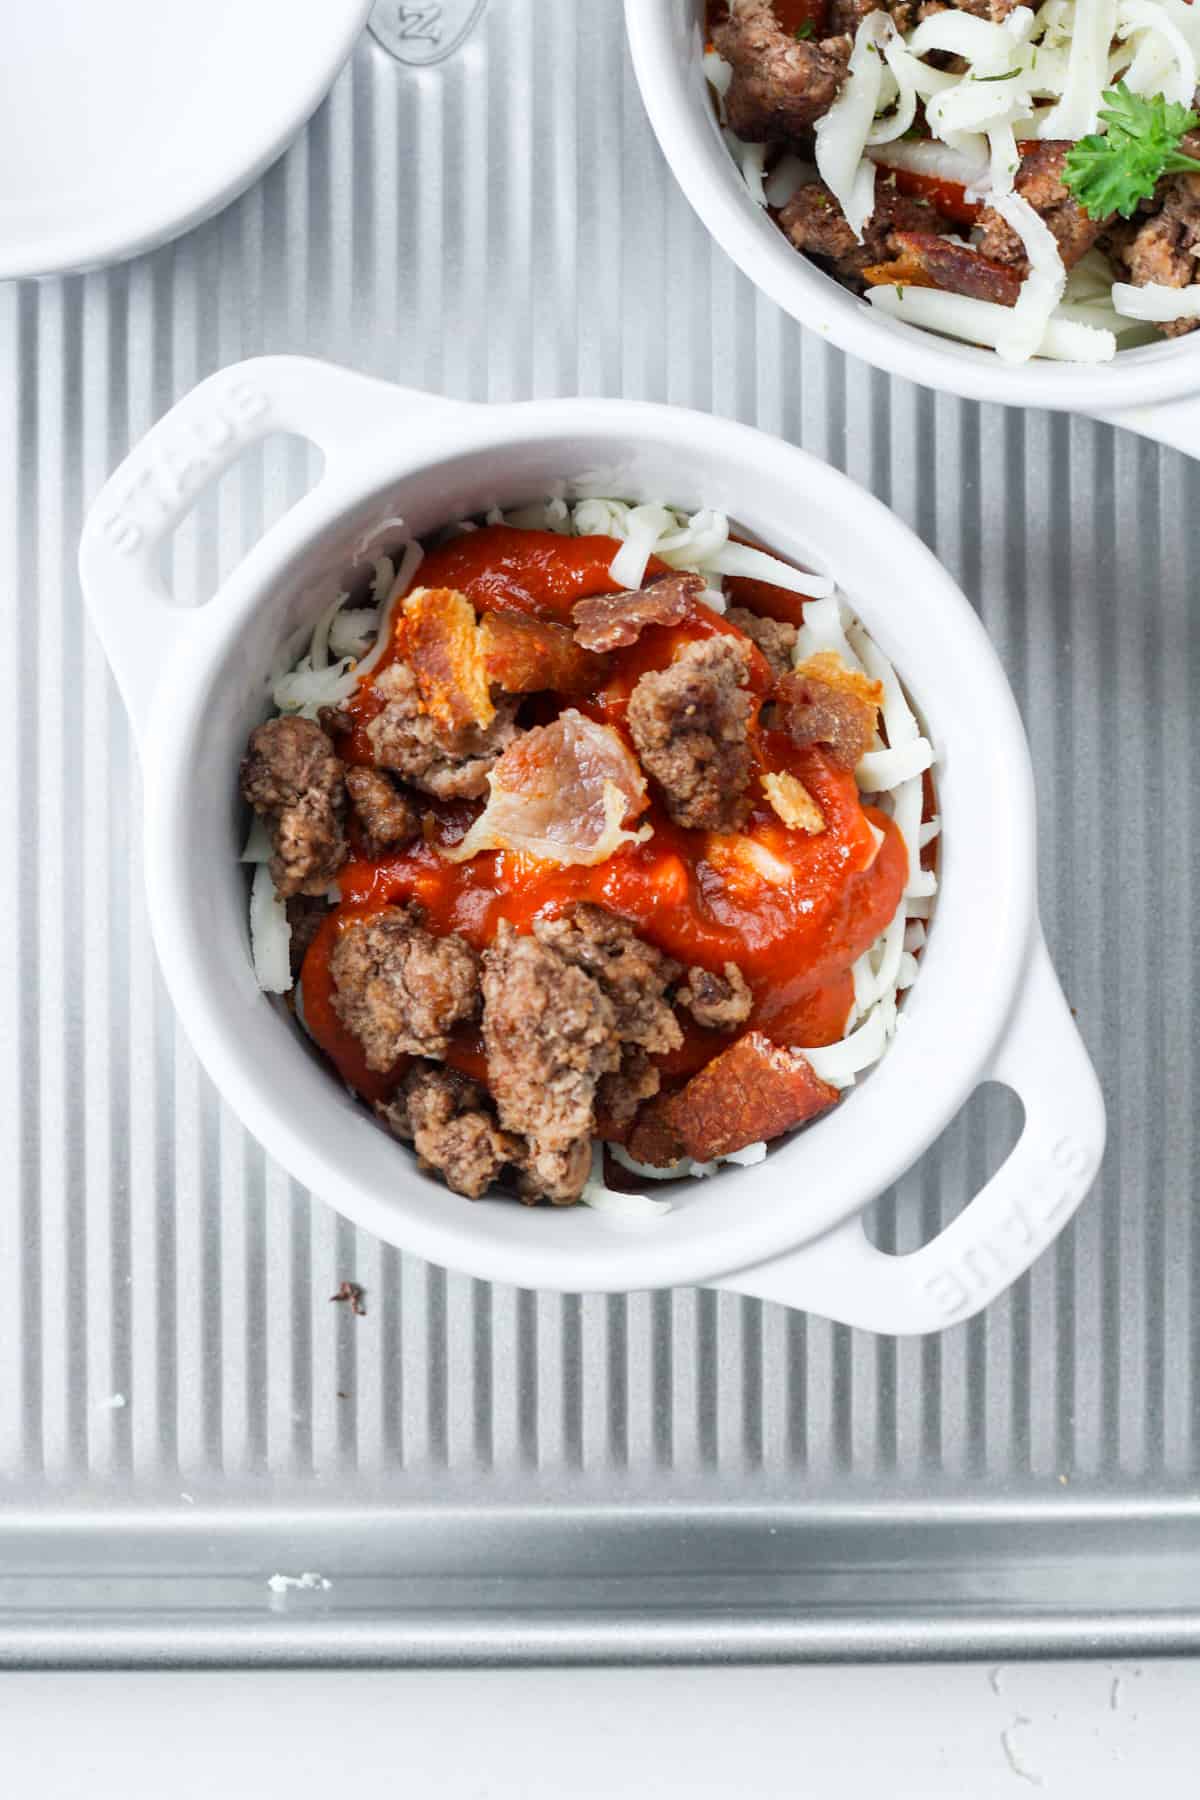 Bowl with beef and bacon.